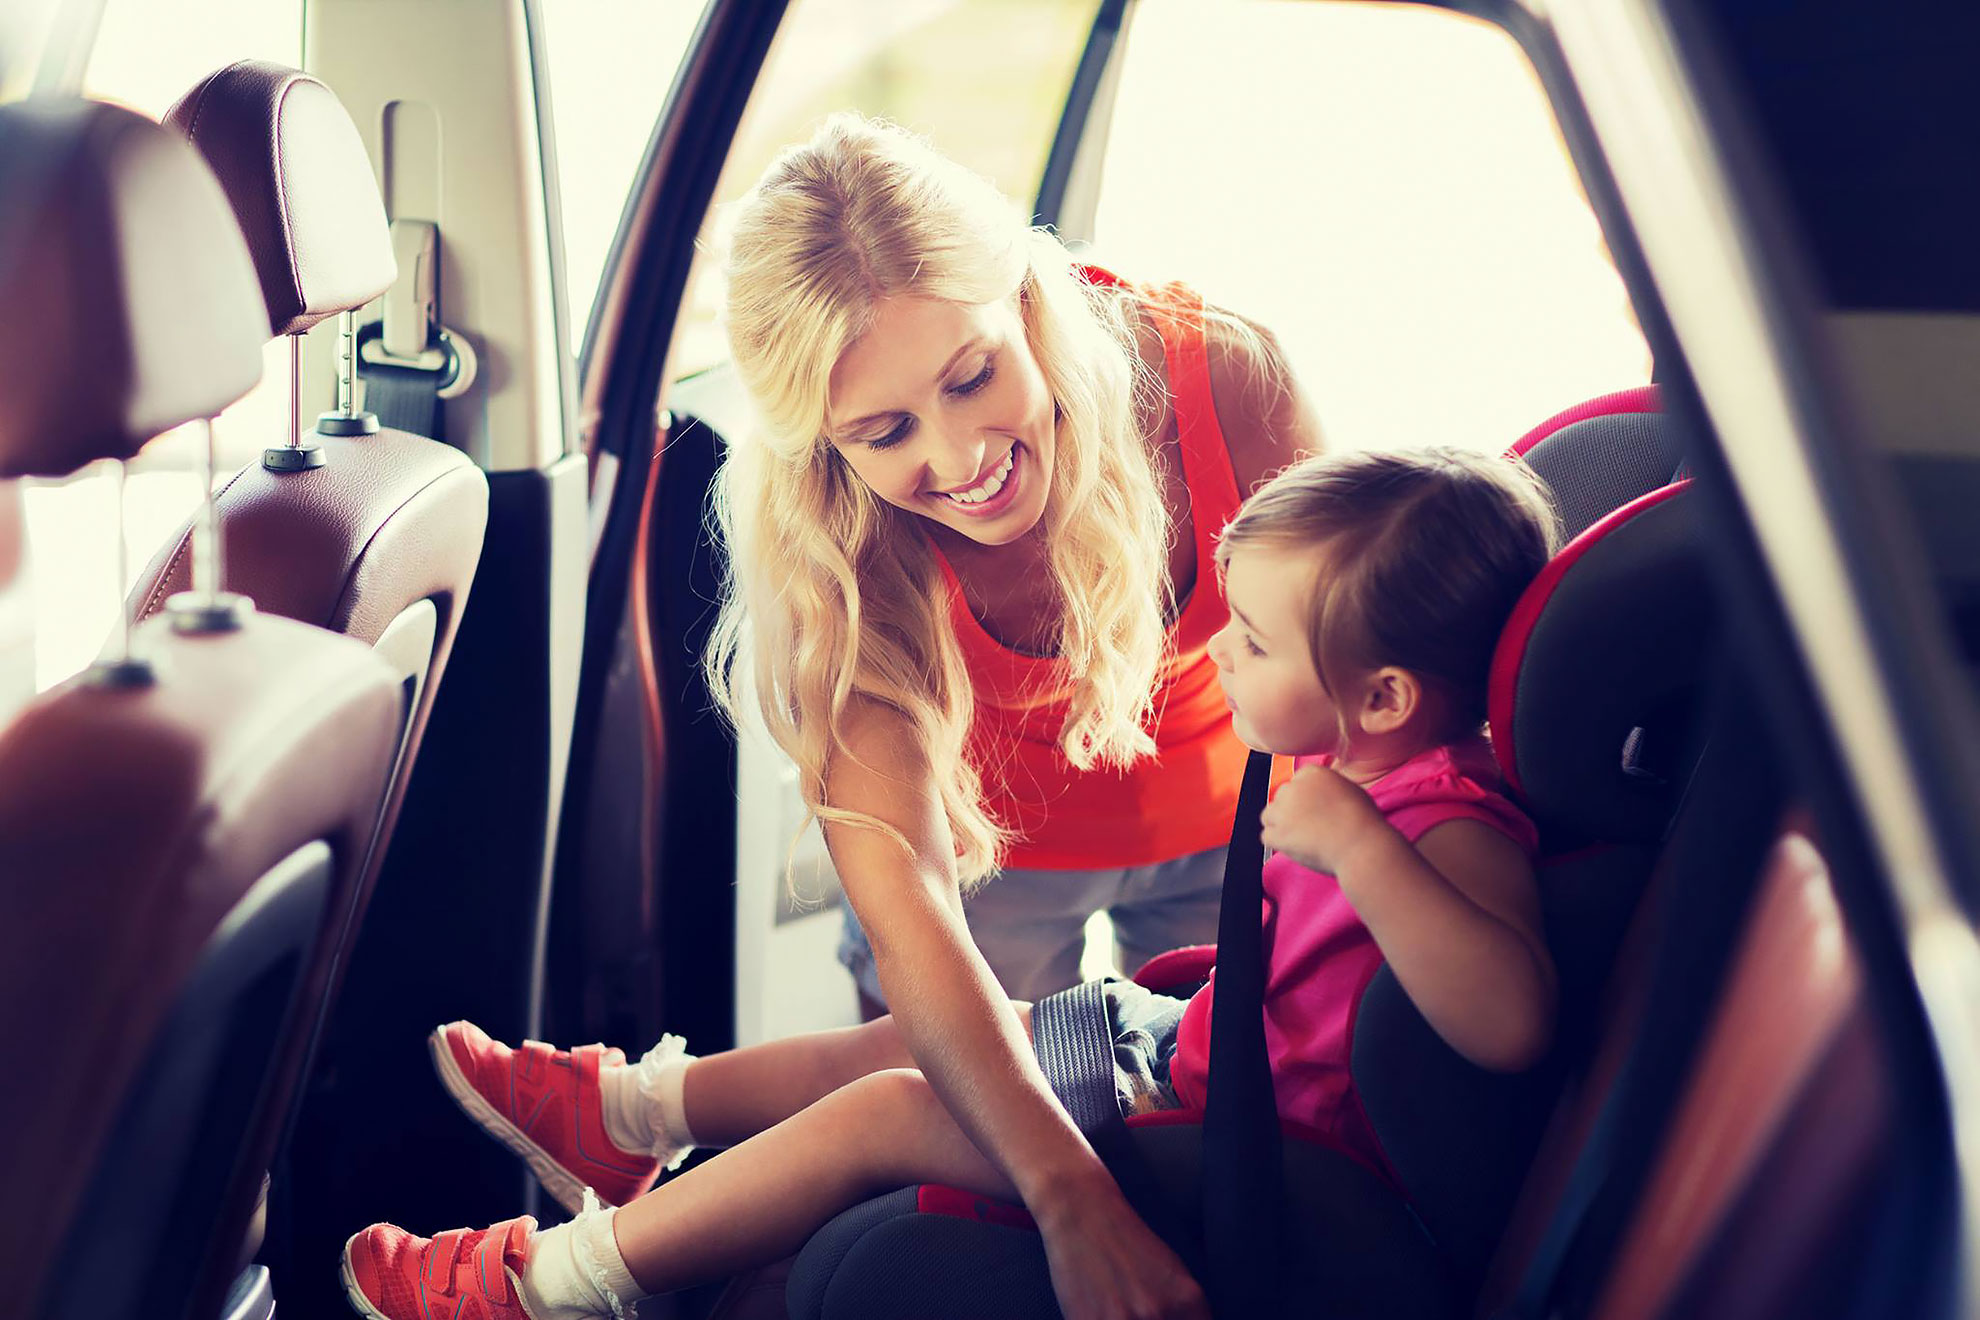 New child car seat rules